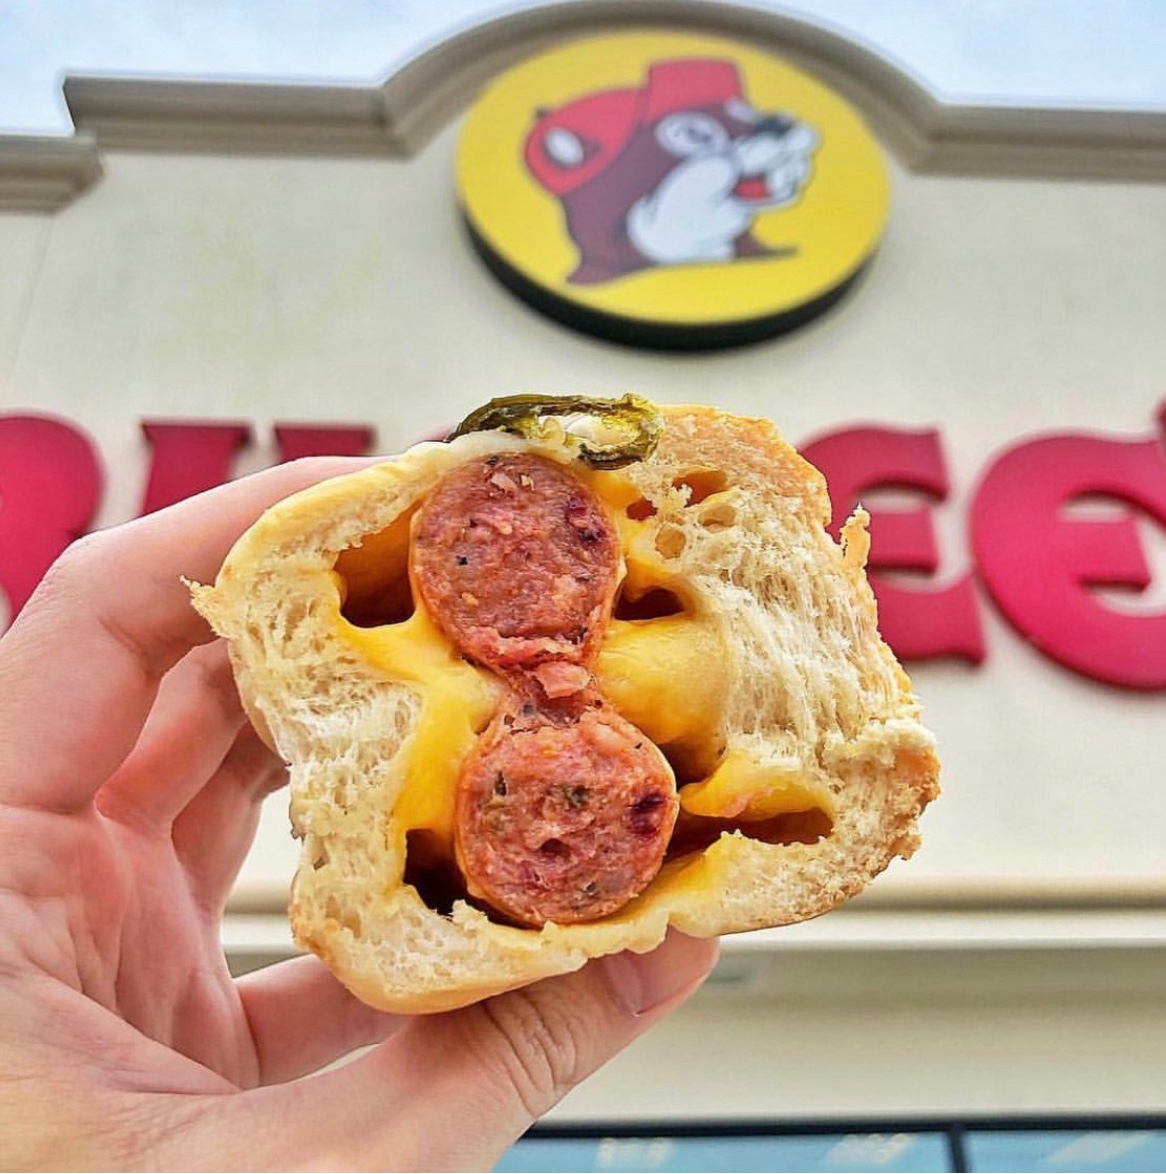 Jalapeno, sausage and cheese kolache from Buc-ee's